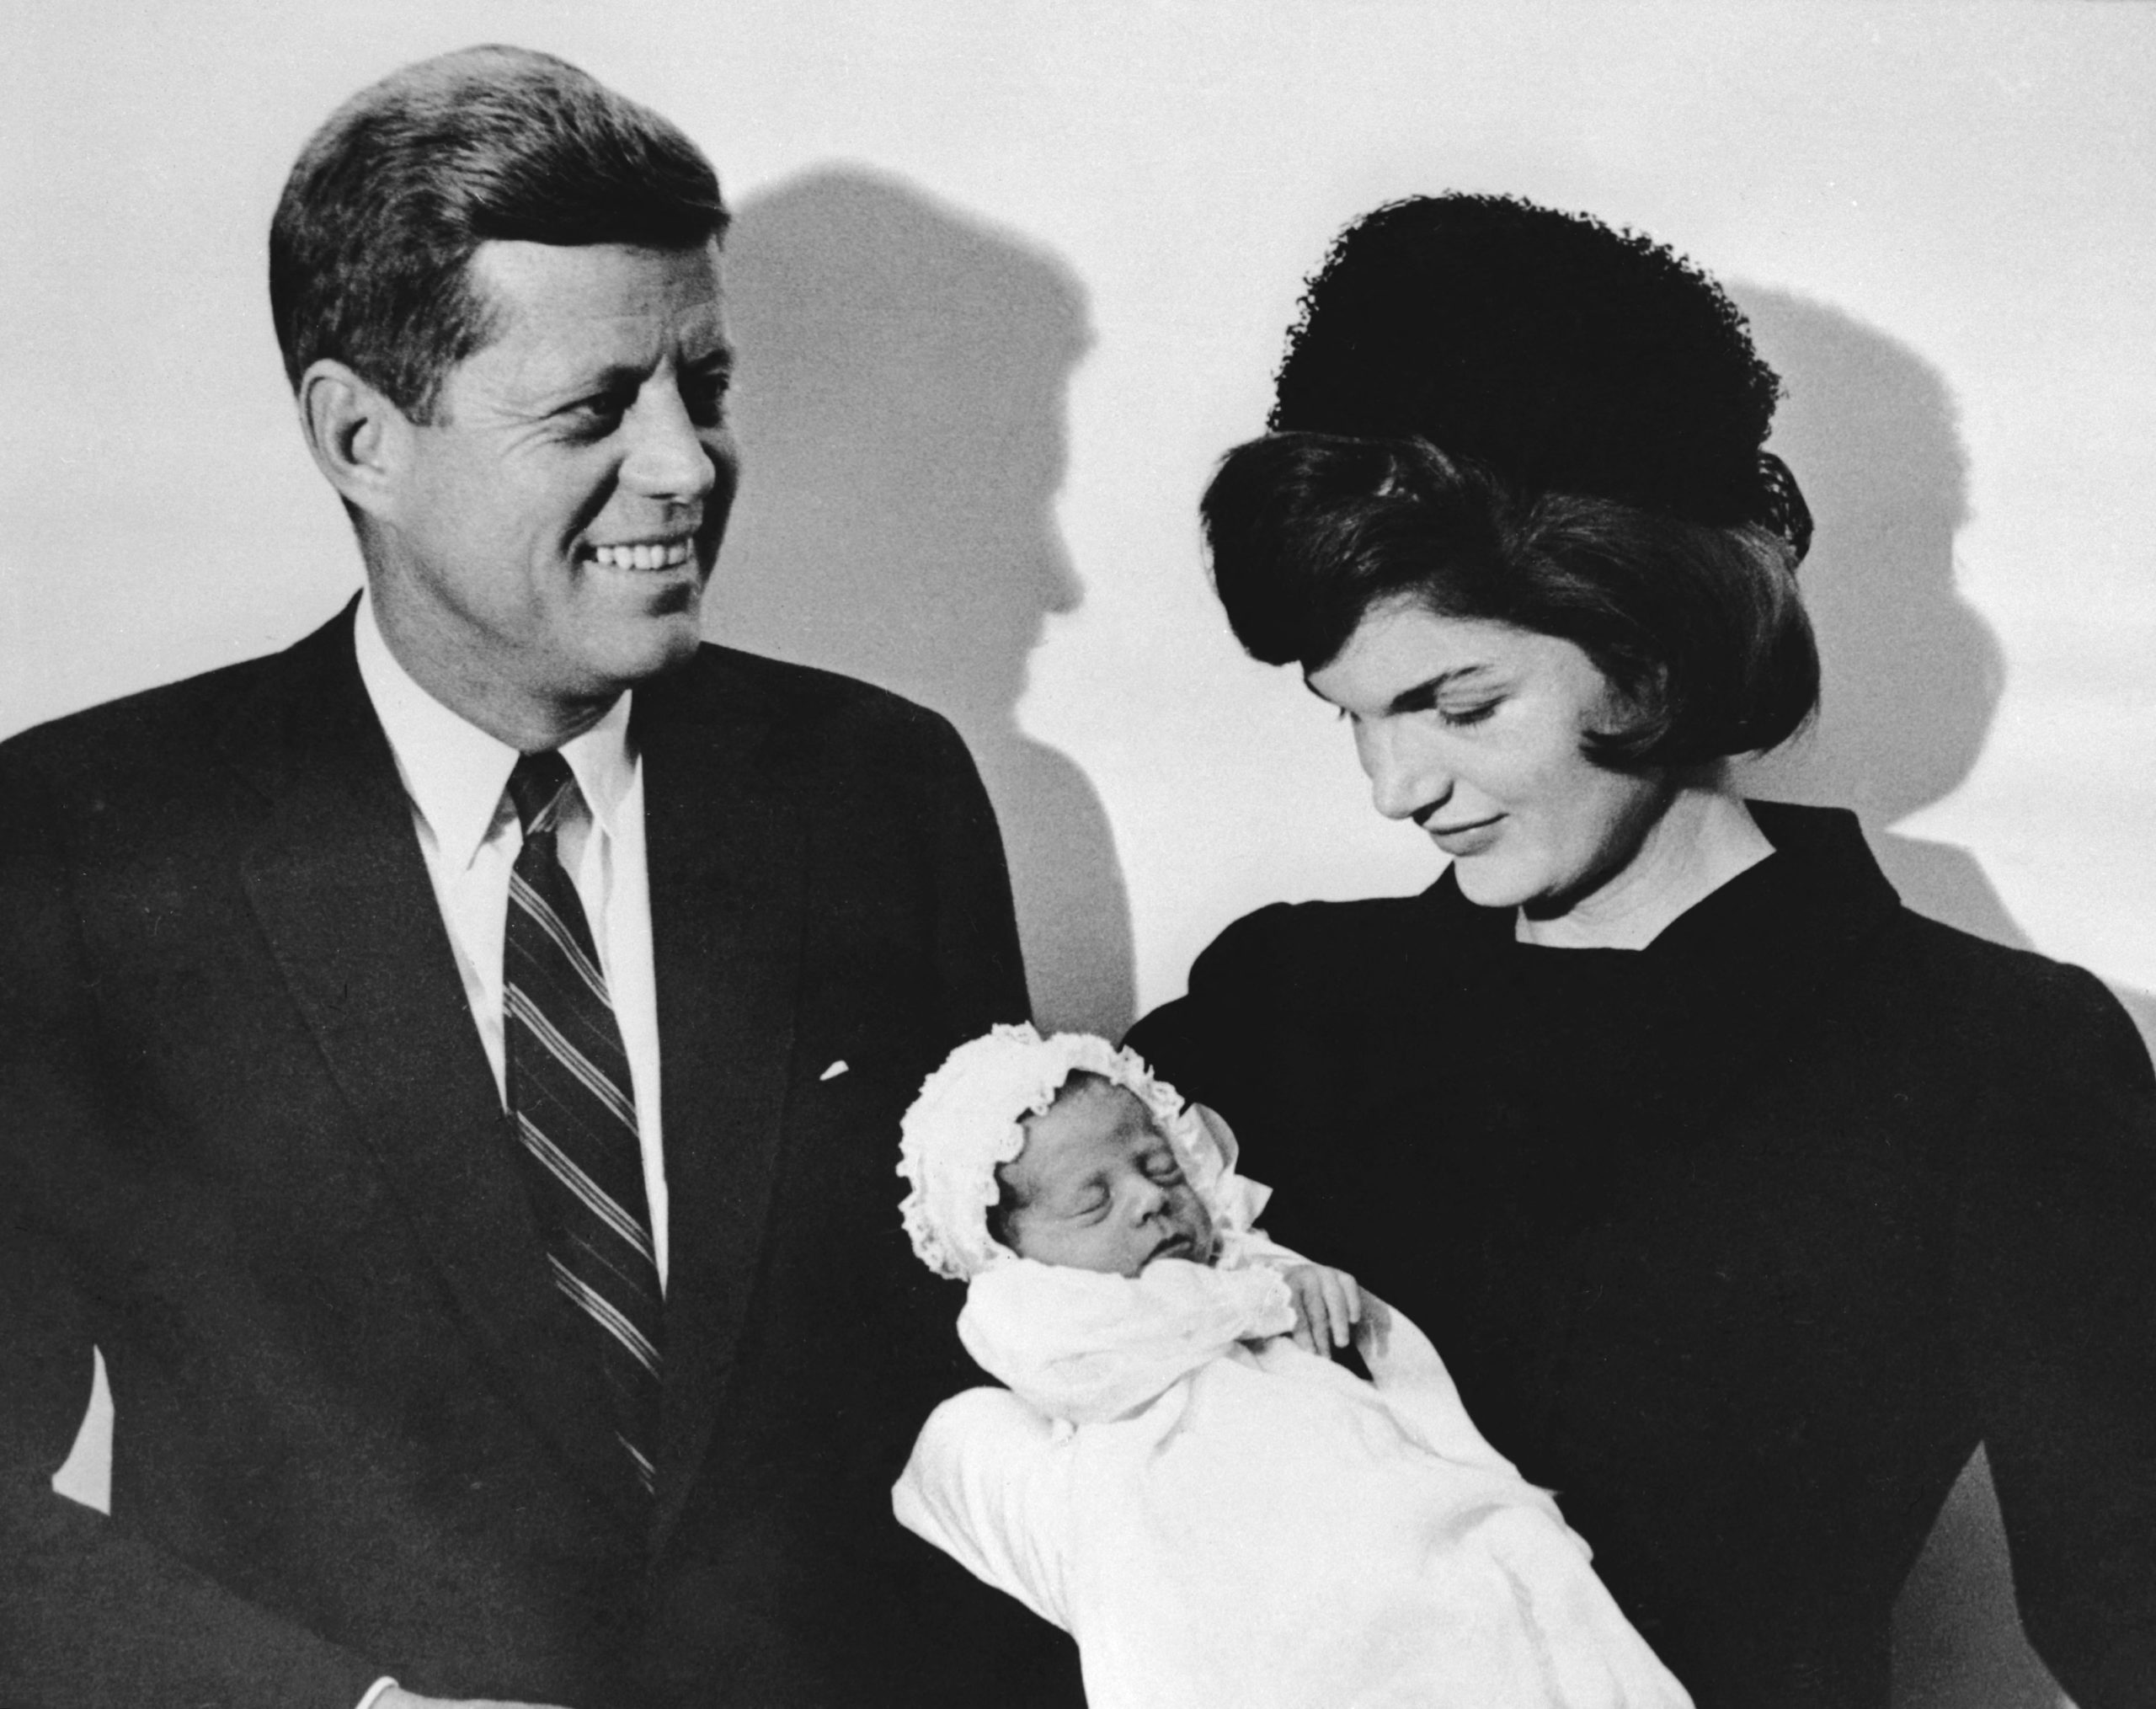 This December 10, 1960 photo shows John F. Kennedy and his wife Jacqueline holding their son John during the christening ceremony at the chapel of Georgetown University in Washington, DC. (Photo by Sam SCHULMAN / AFP) (Photo by SAM SCHULMAN/AFP via Getty Images)